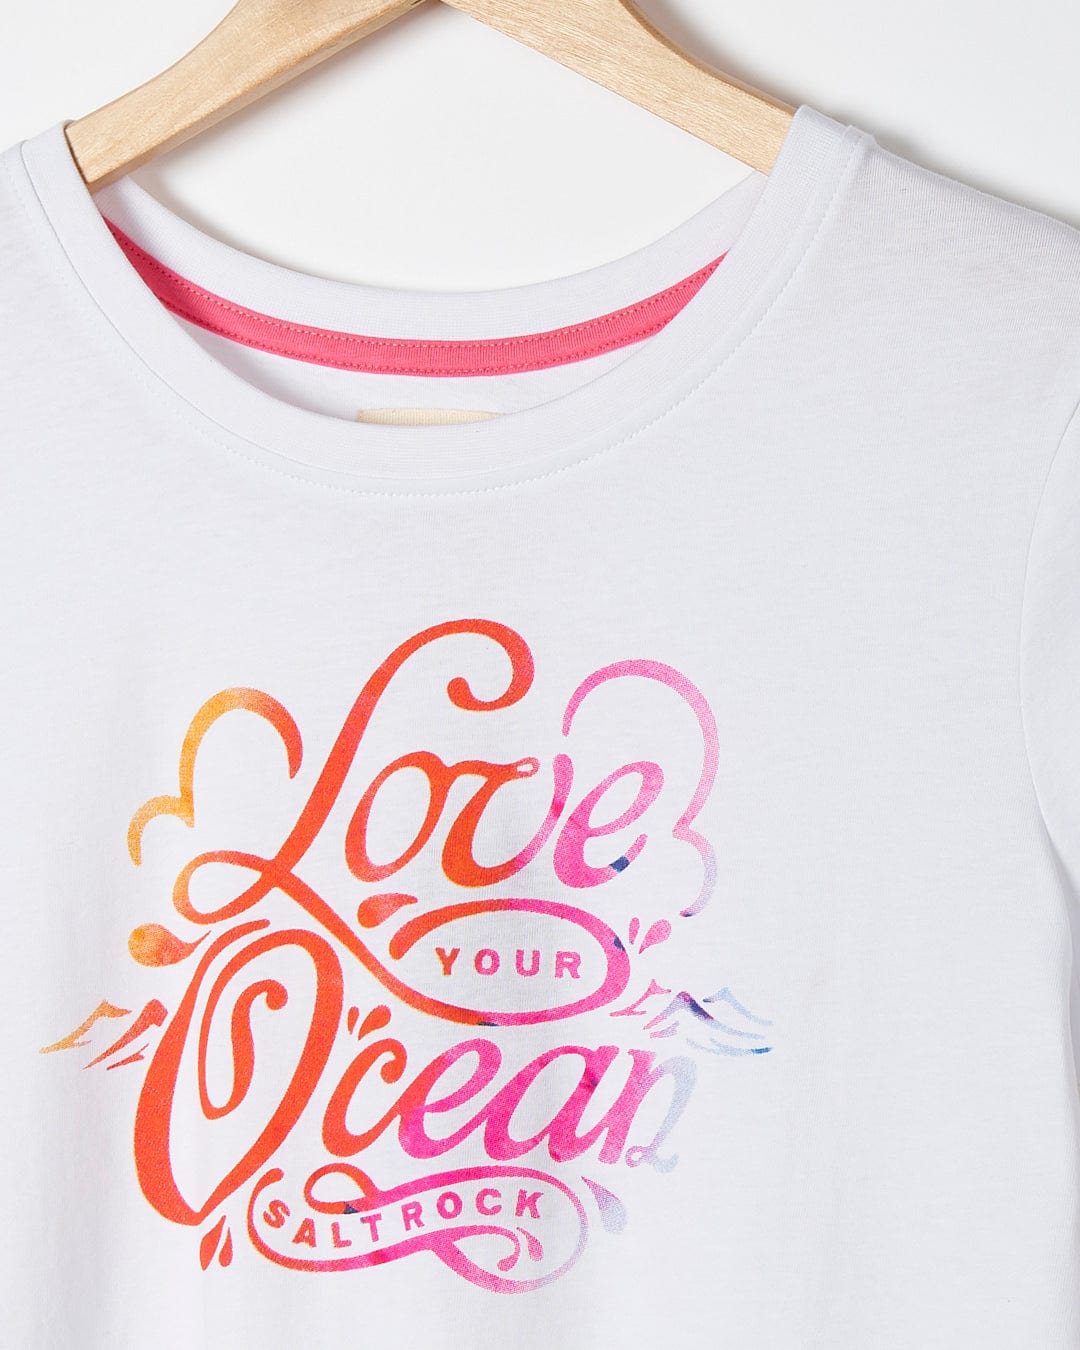 A white Saltrock t-shirt that says Love Your Ocean.